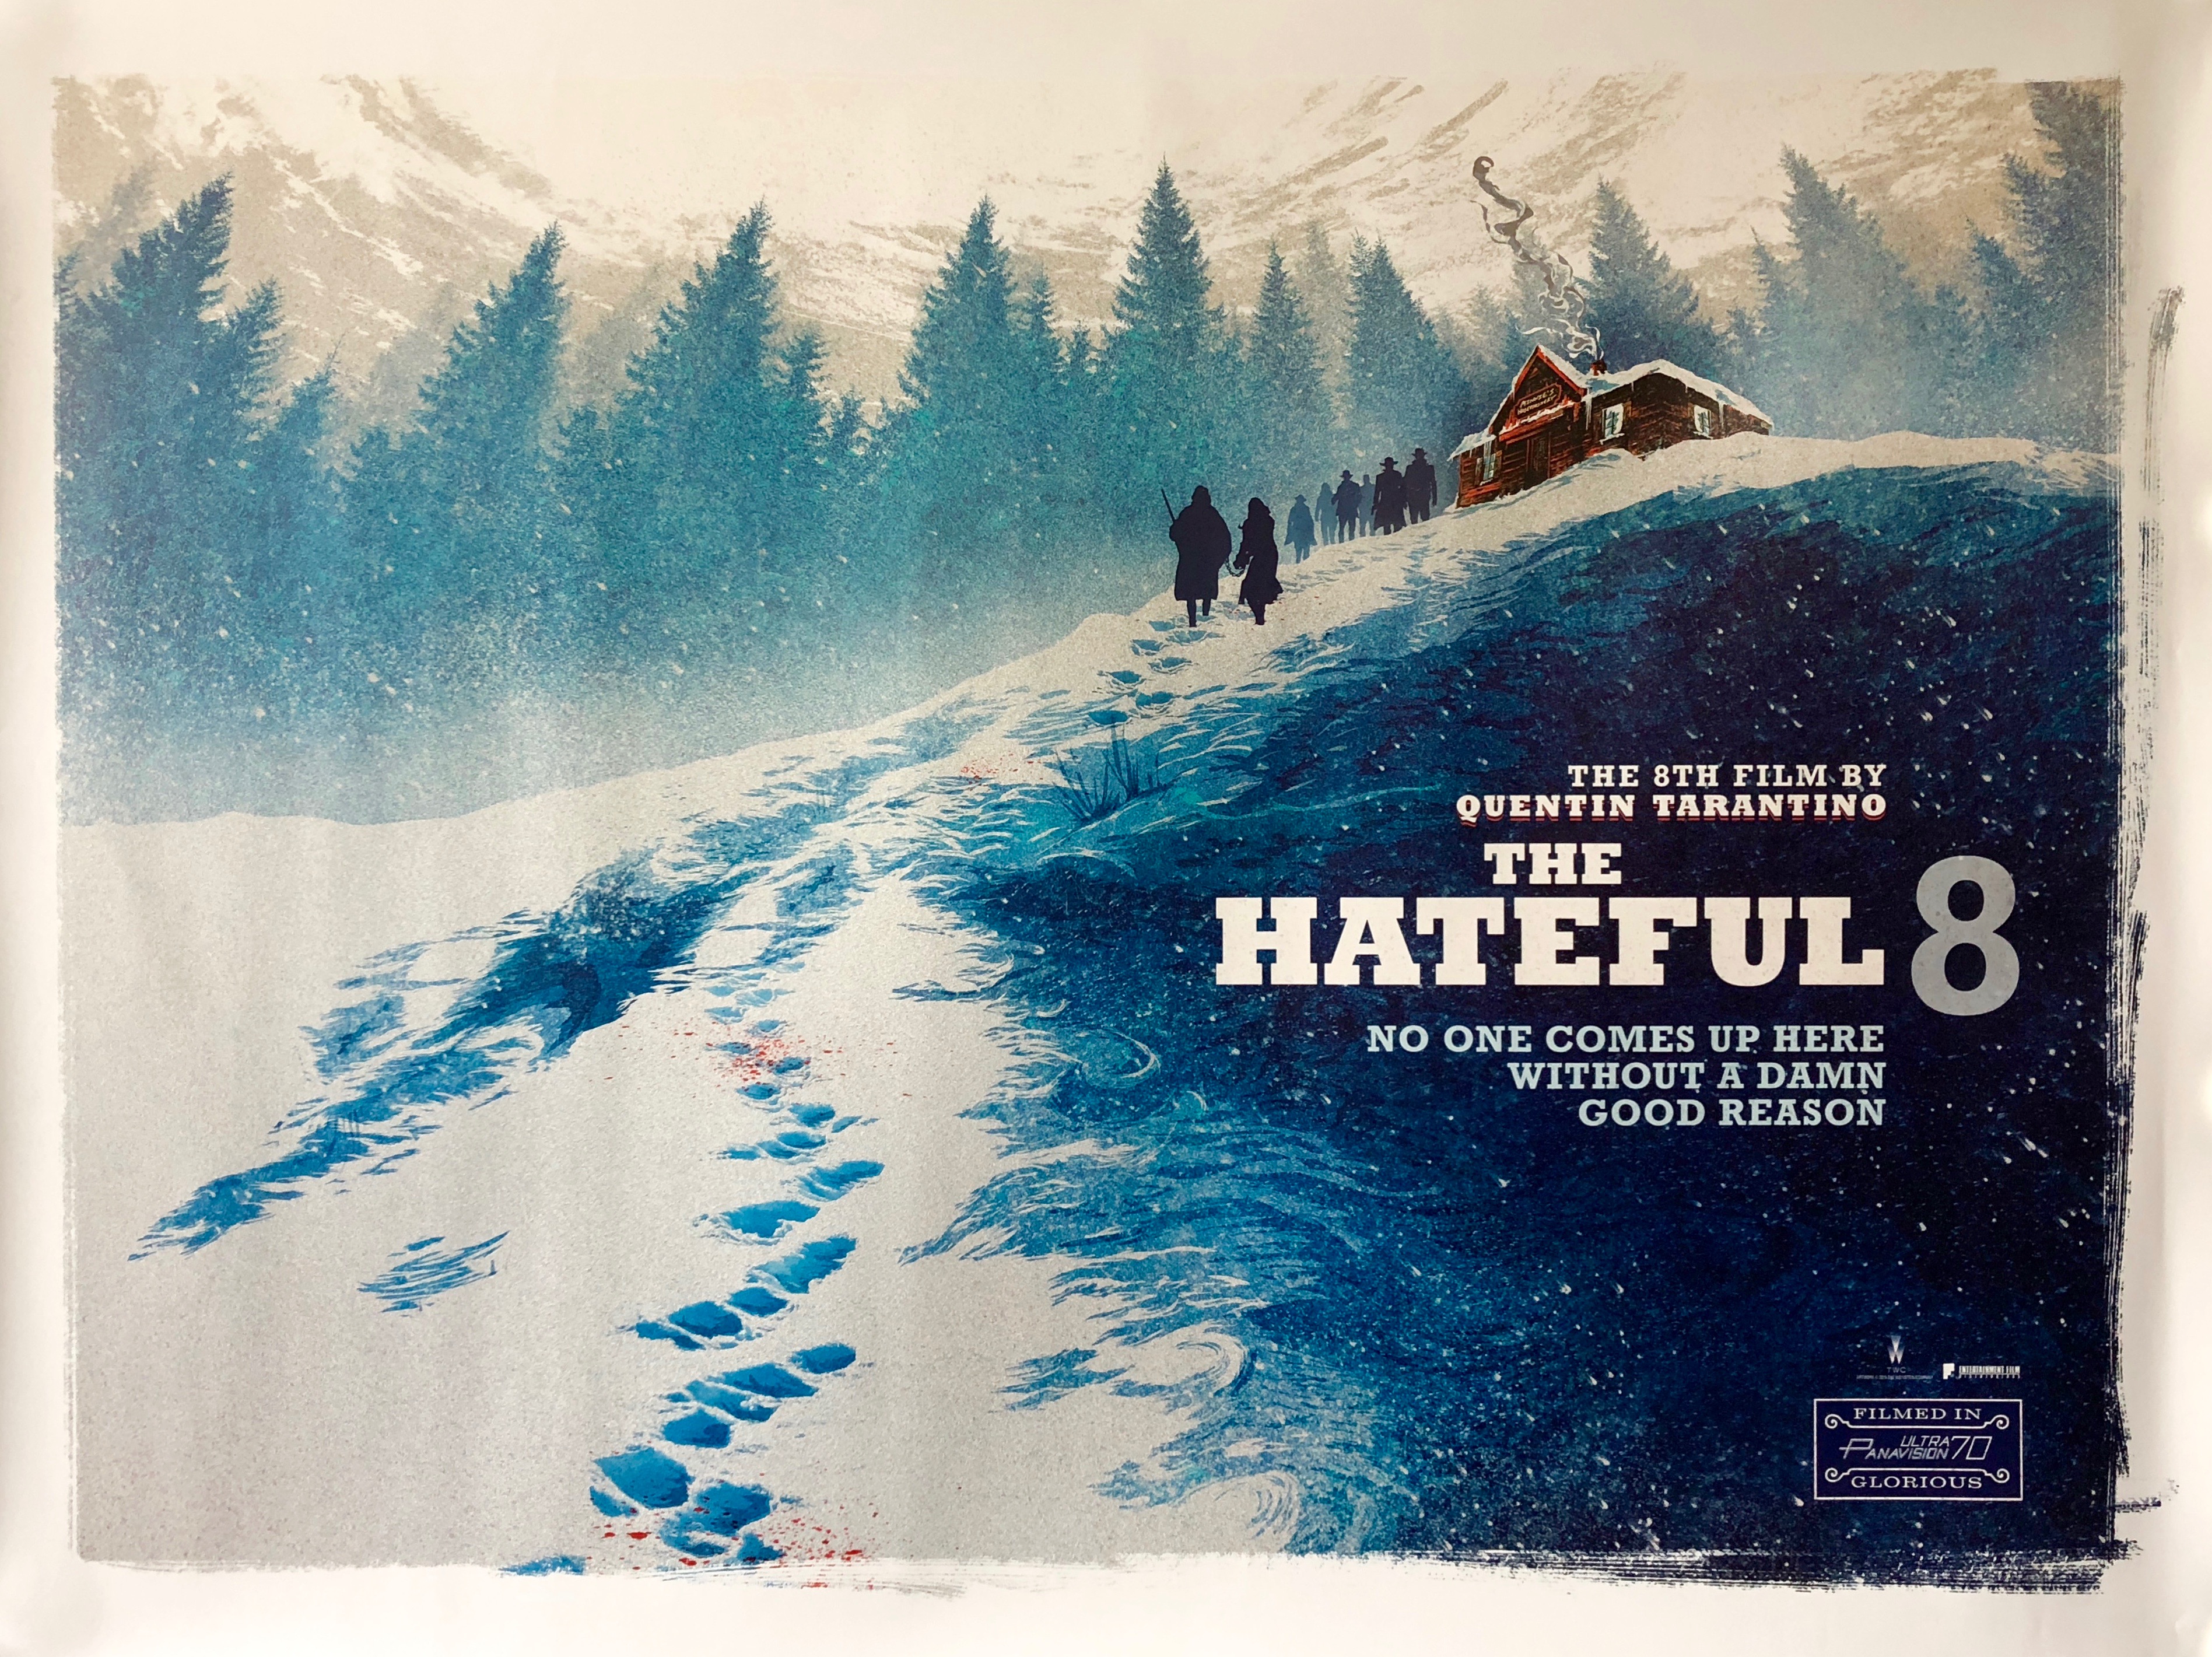 30CM X 43CM Brand New US Imported Wall Movie Poster Print Tarantino THE HATEFUL EIGHT 